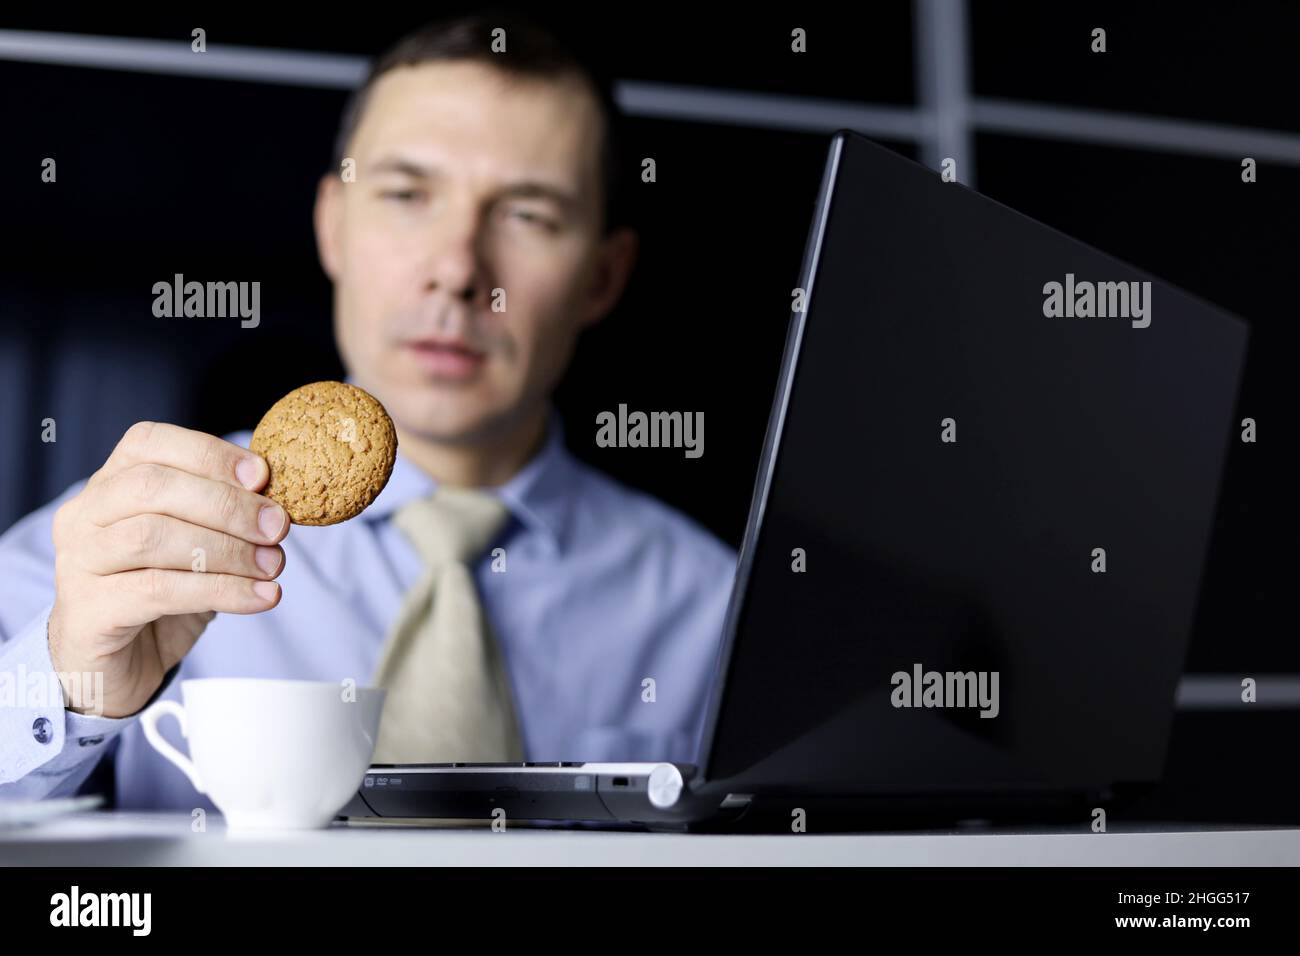 Man eating oatmeal cookie sitting at laptop. Comfort food, sweet dessert against stress, break during work in office Stock Photo